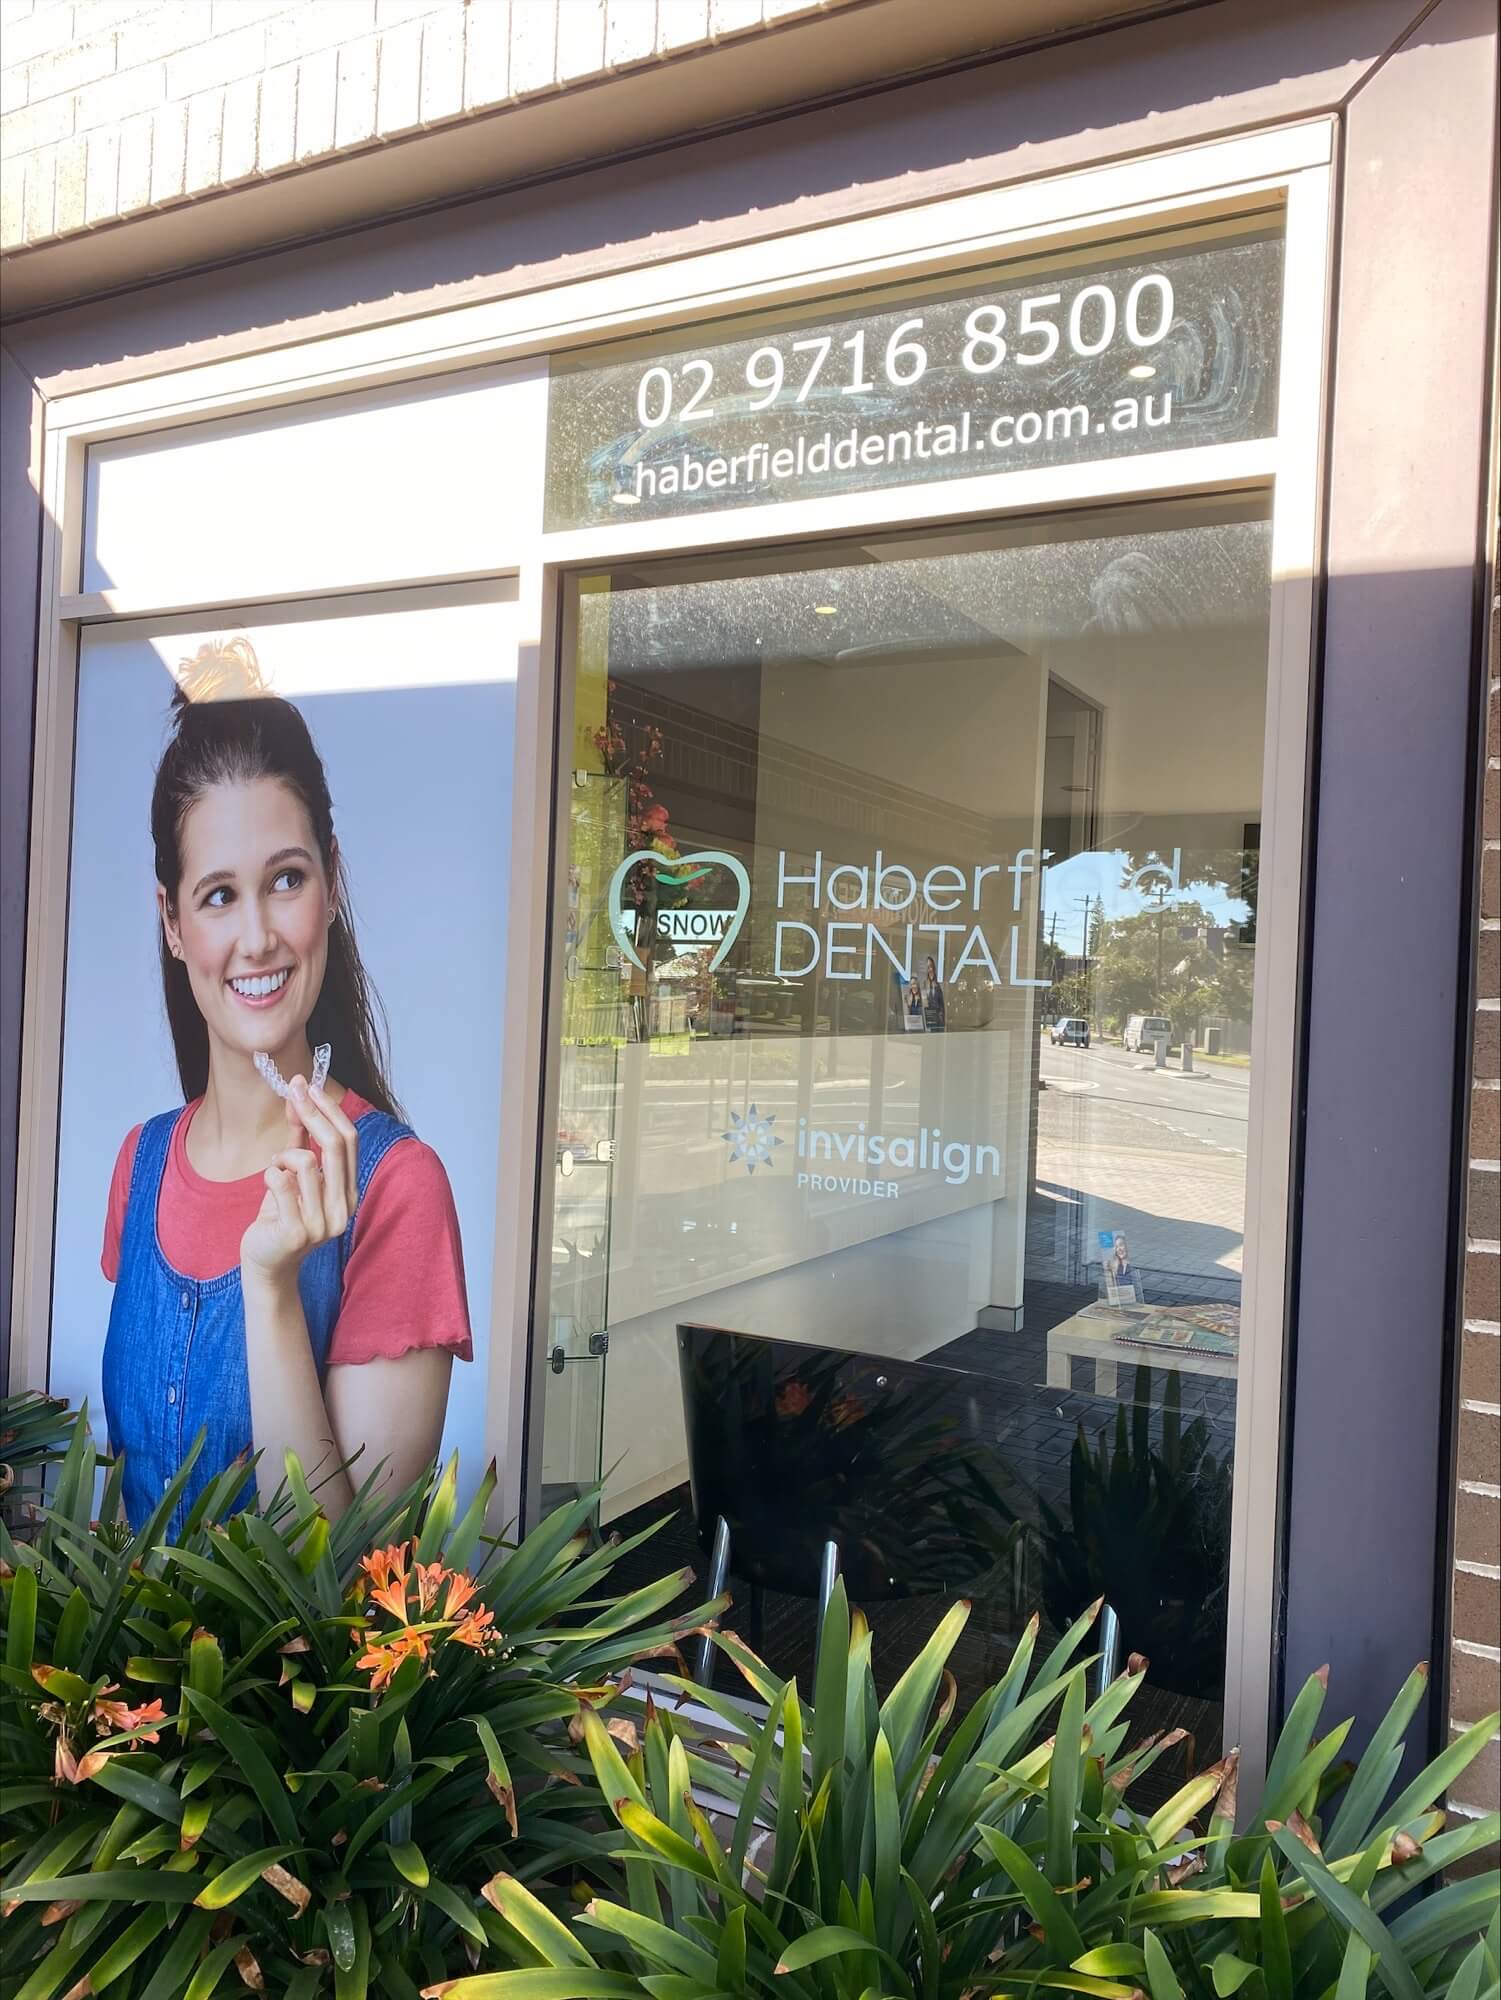 Leichhardt Dental in Haberfield serves patients with a smile